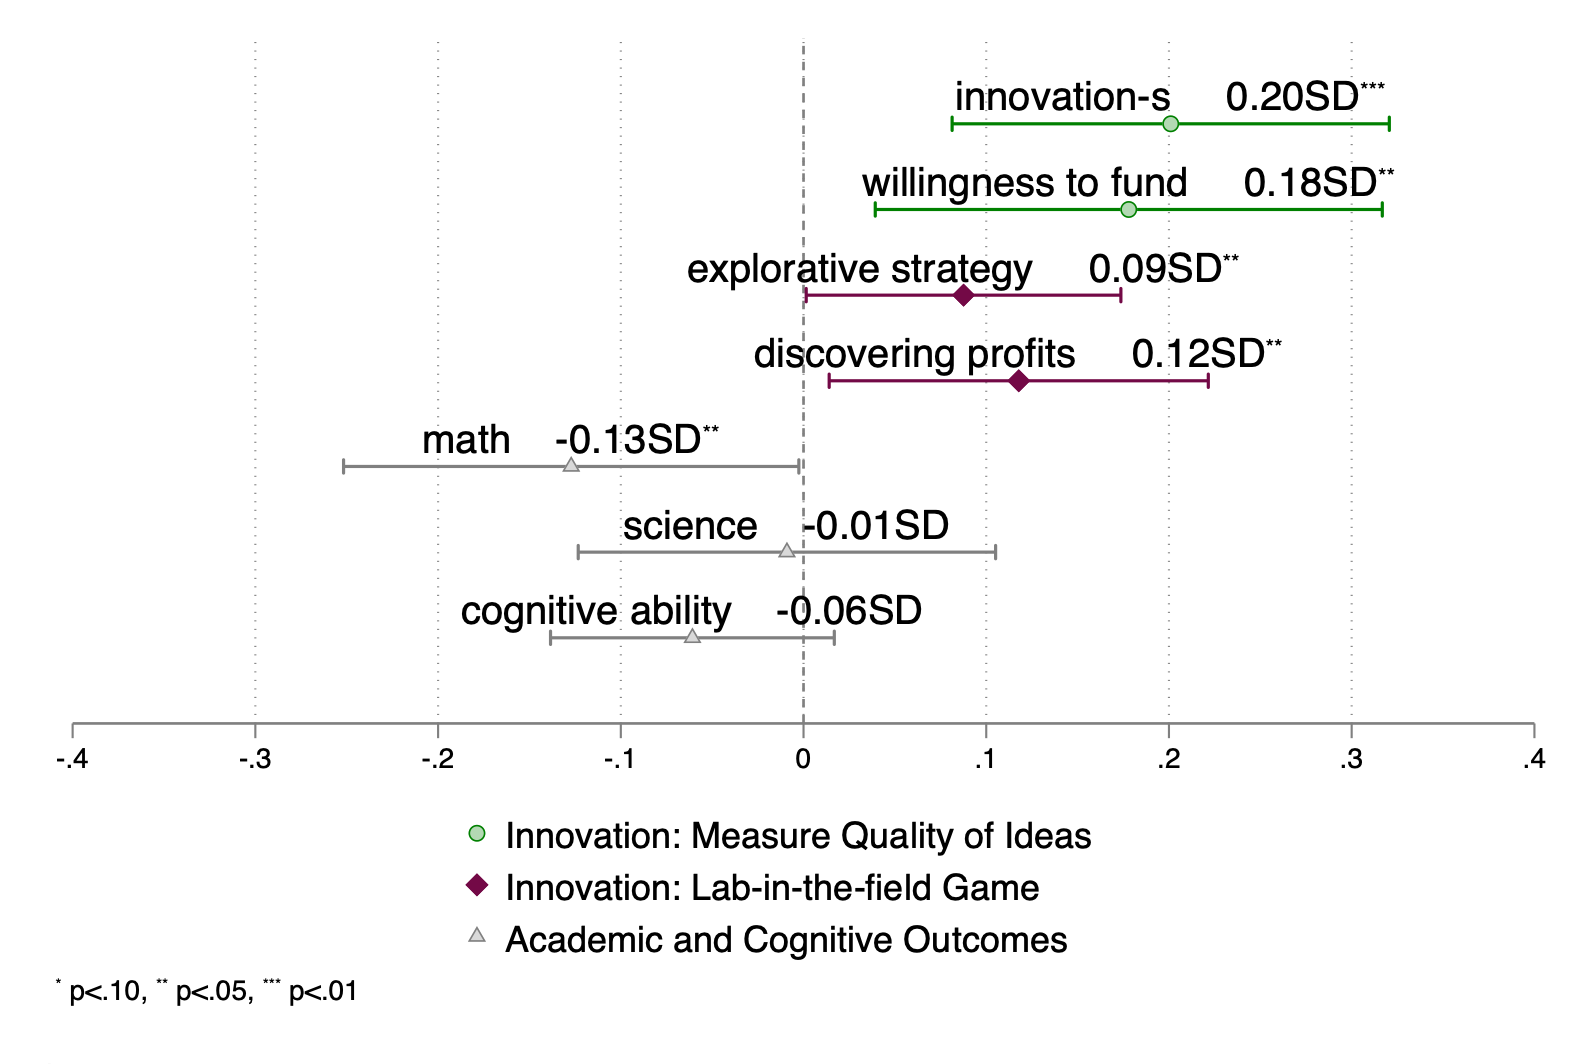 Innovation is teachable, but at the expense of academic motivation